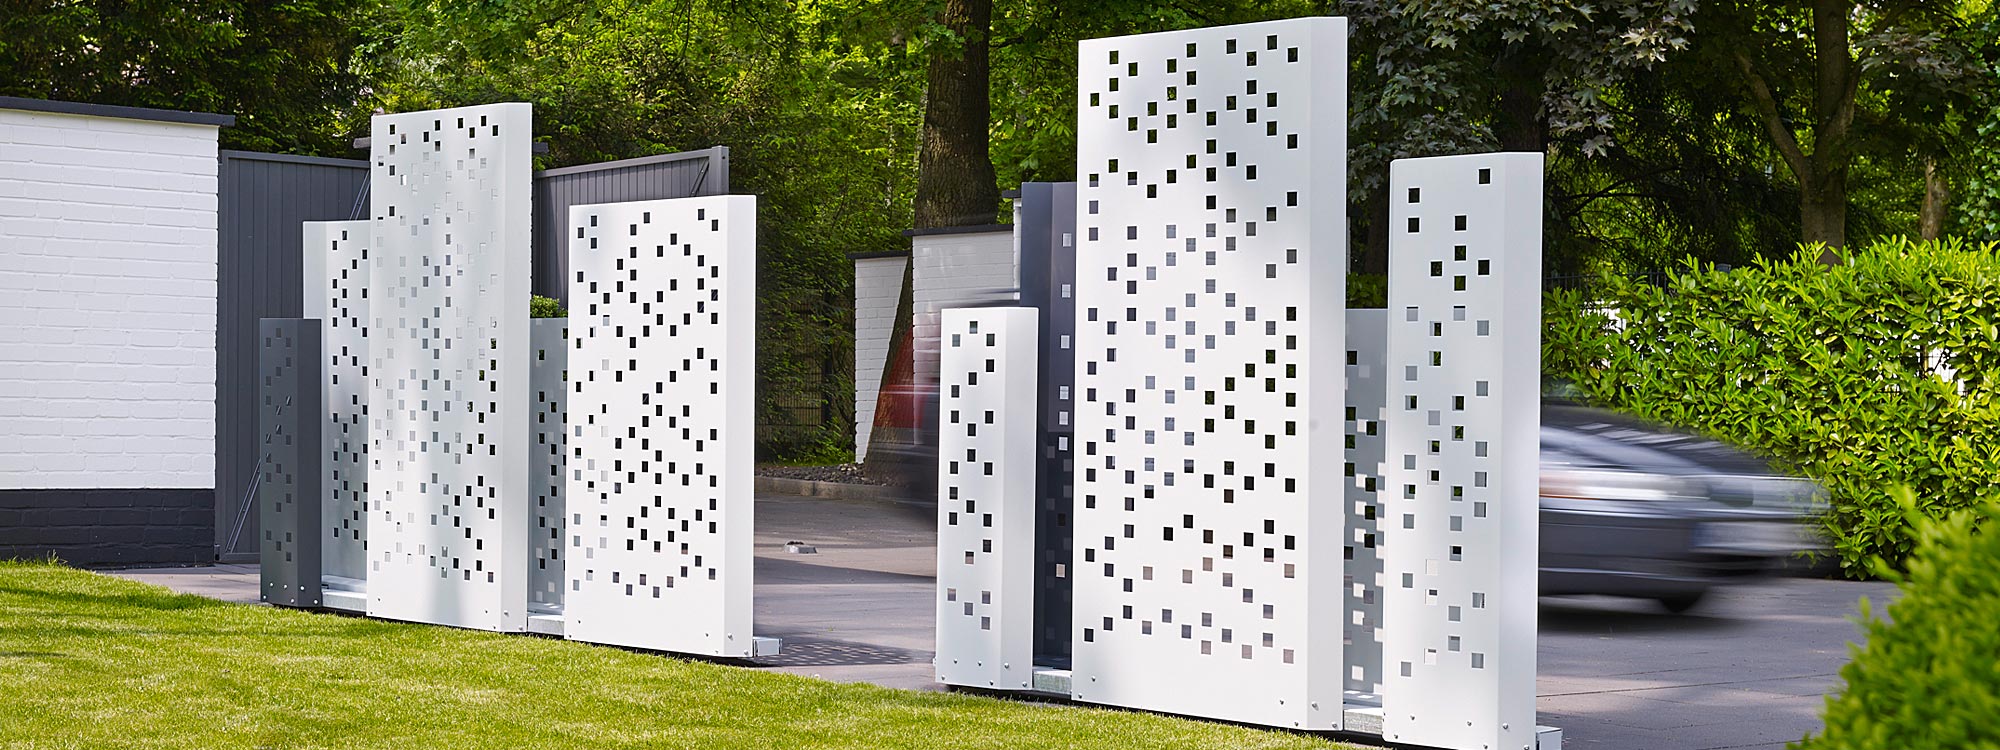 Separo modern outdoor screen is a geometric screen panel in quality exterior screen materials by Flora contract planter company, Germany.